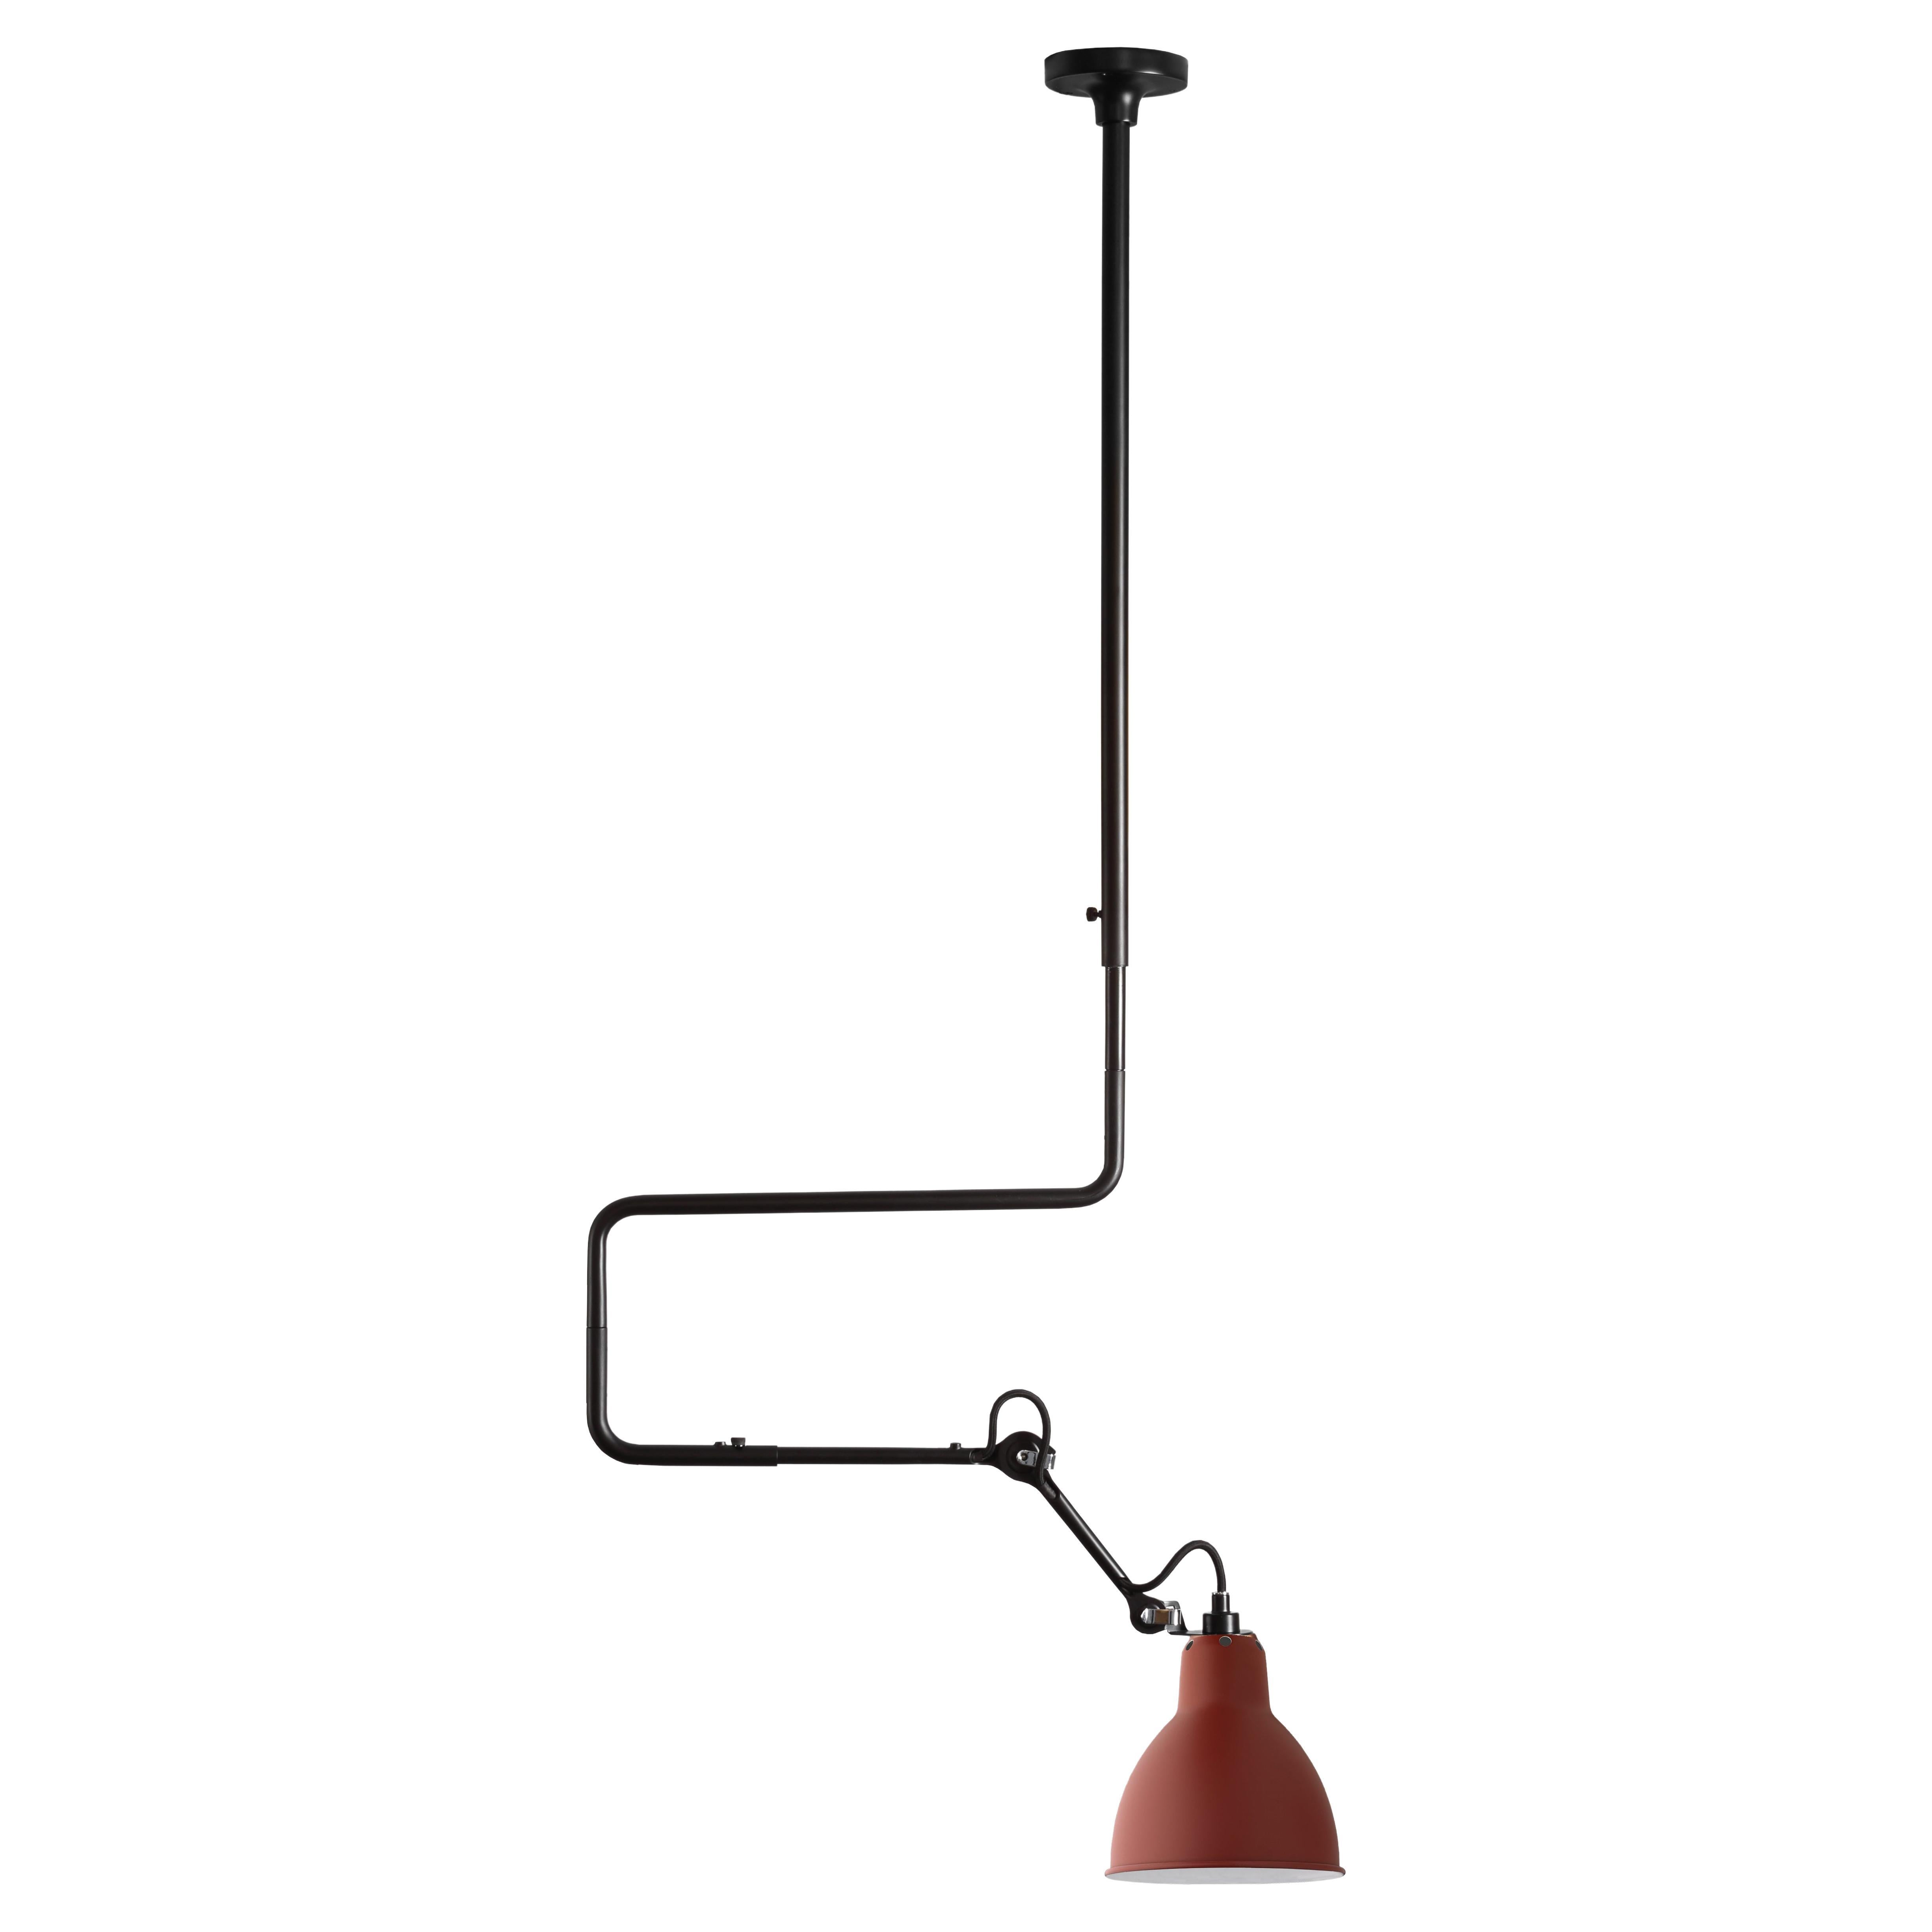 DCW Editions La Lampe Gras N°312 L Pendant Lamp in Black Arm and Red Shade For Sale